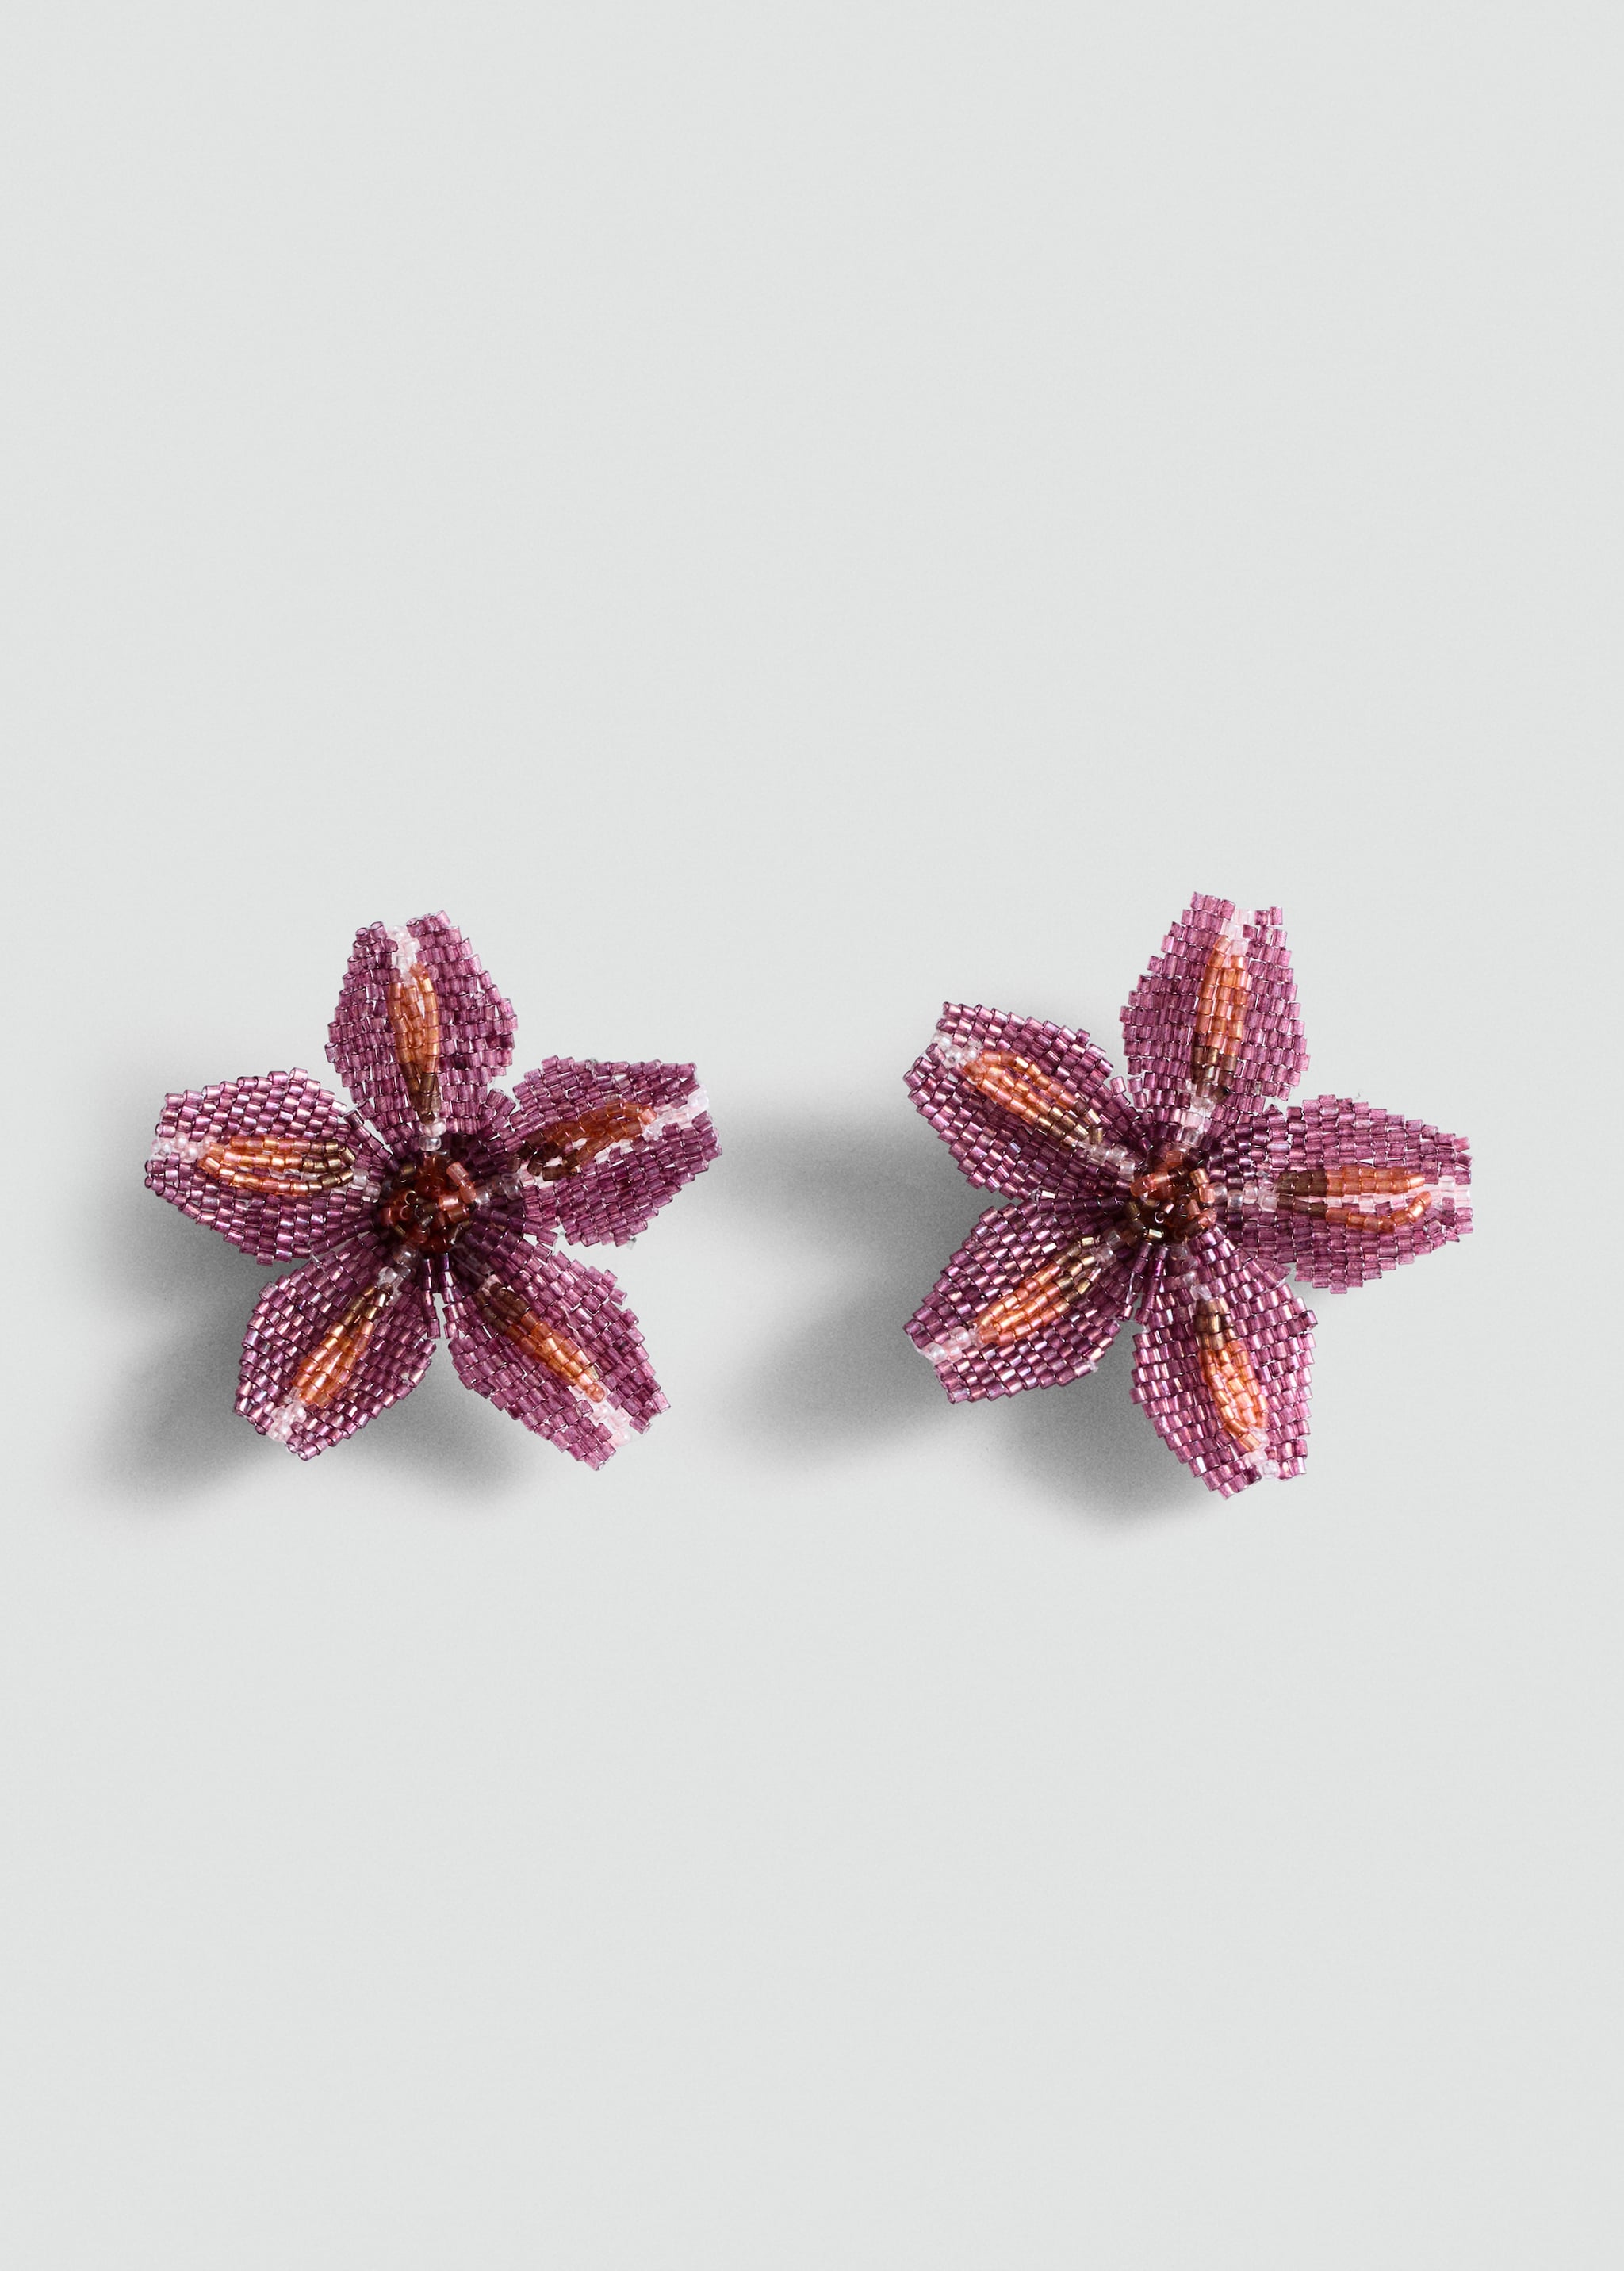 Crystal flower earrings - Article without model